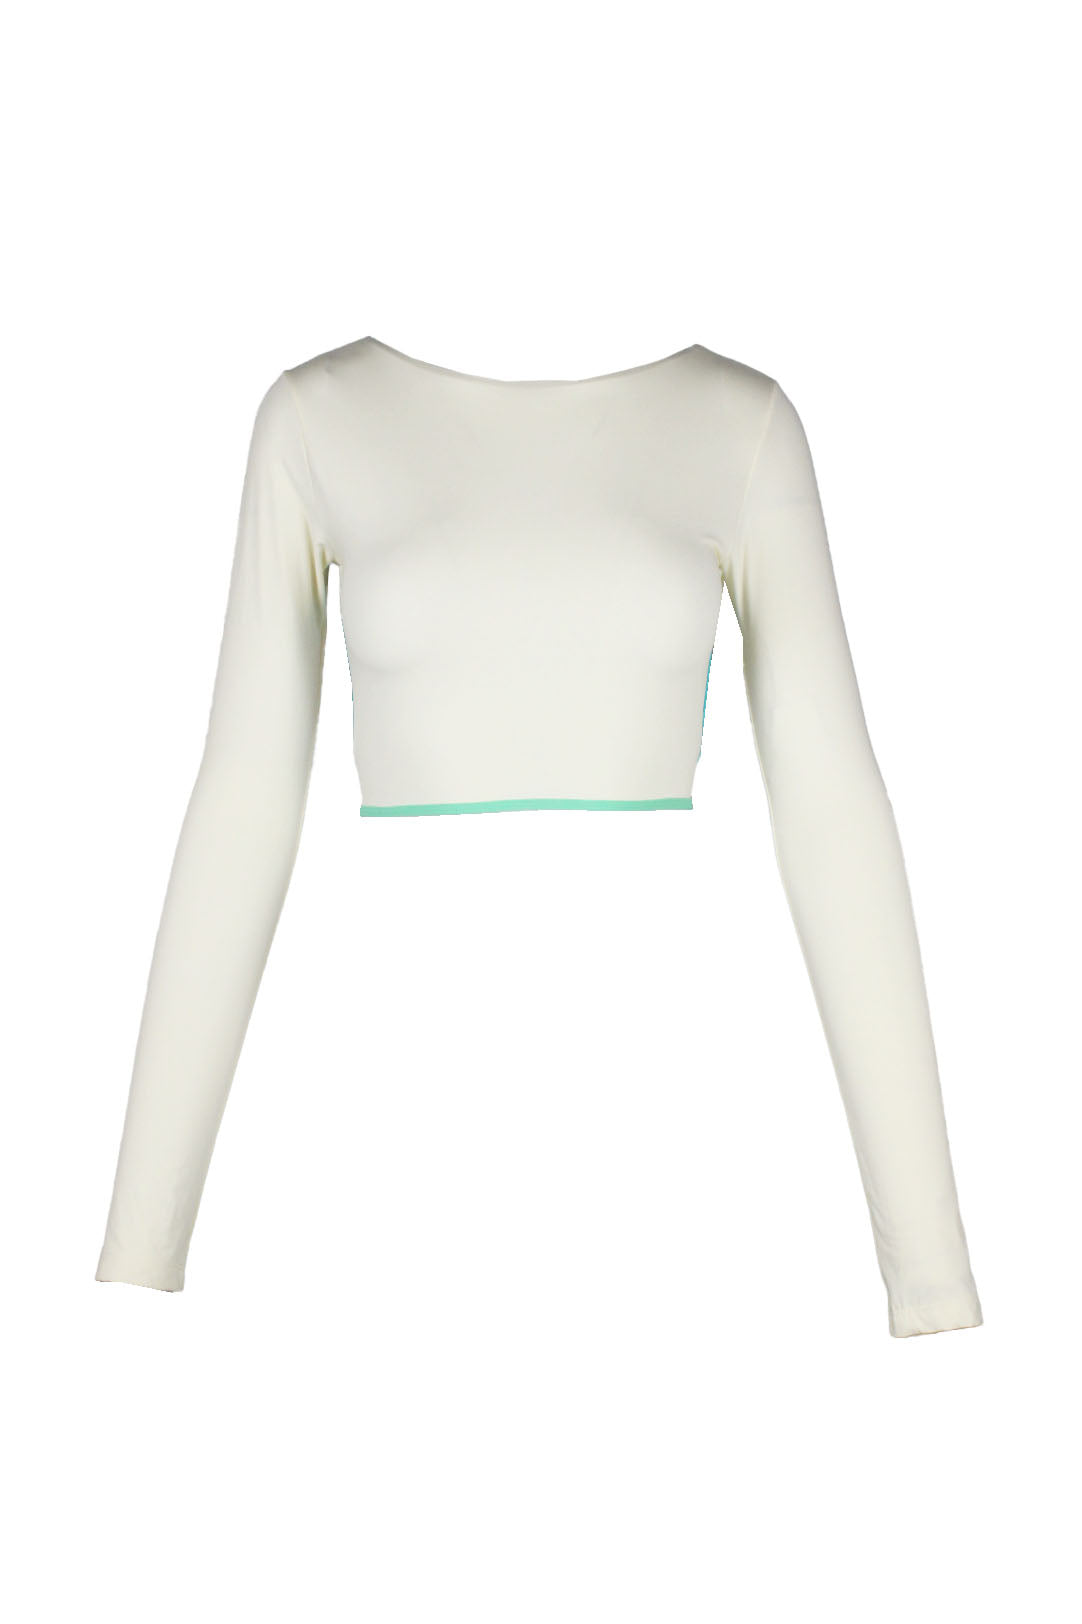 front angle of oneone swimwear white long sleeve cropped top.